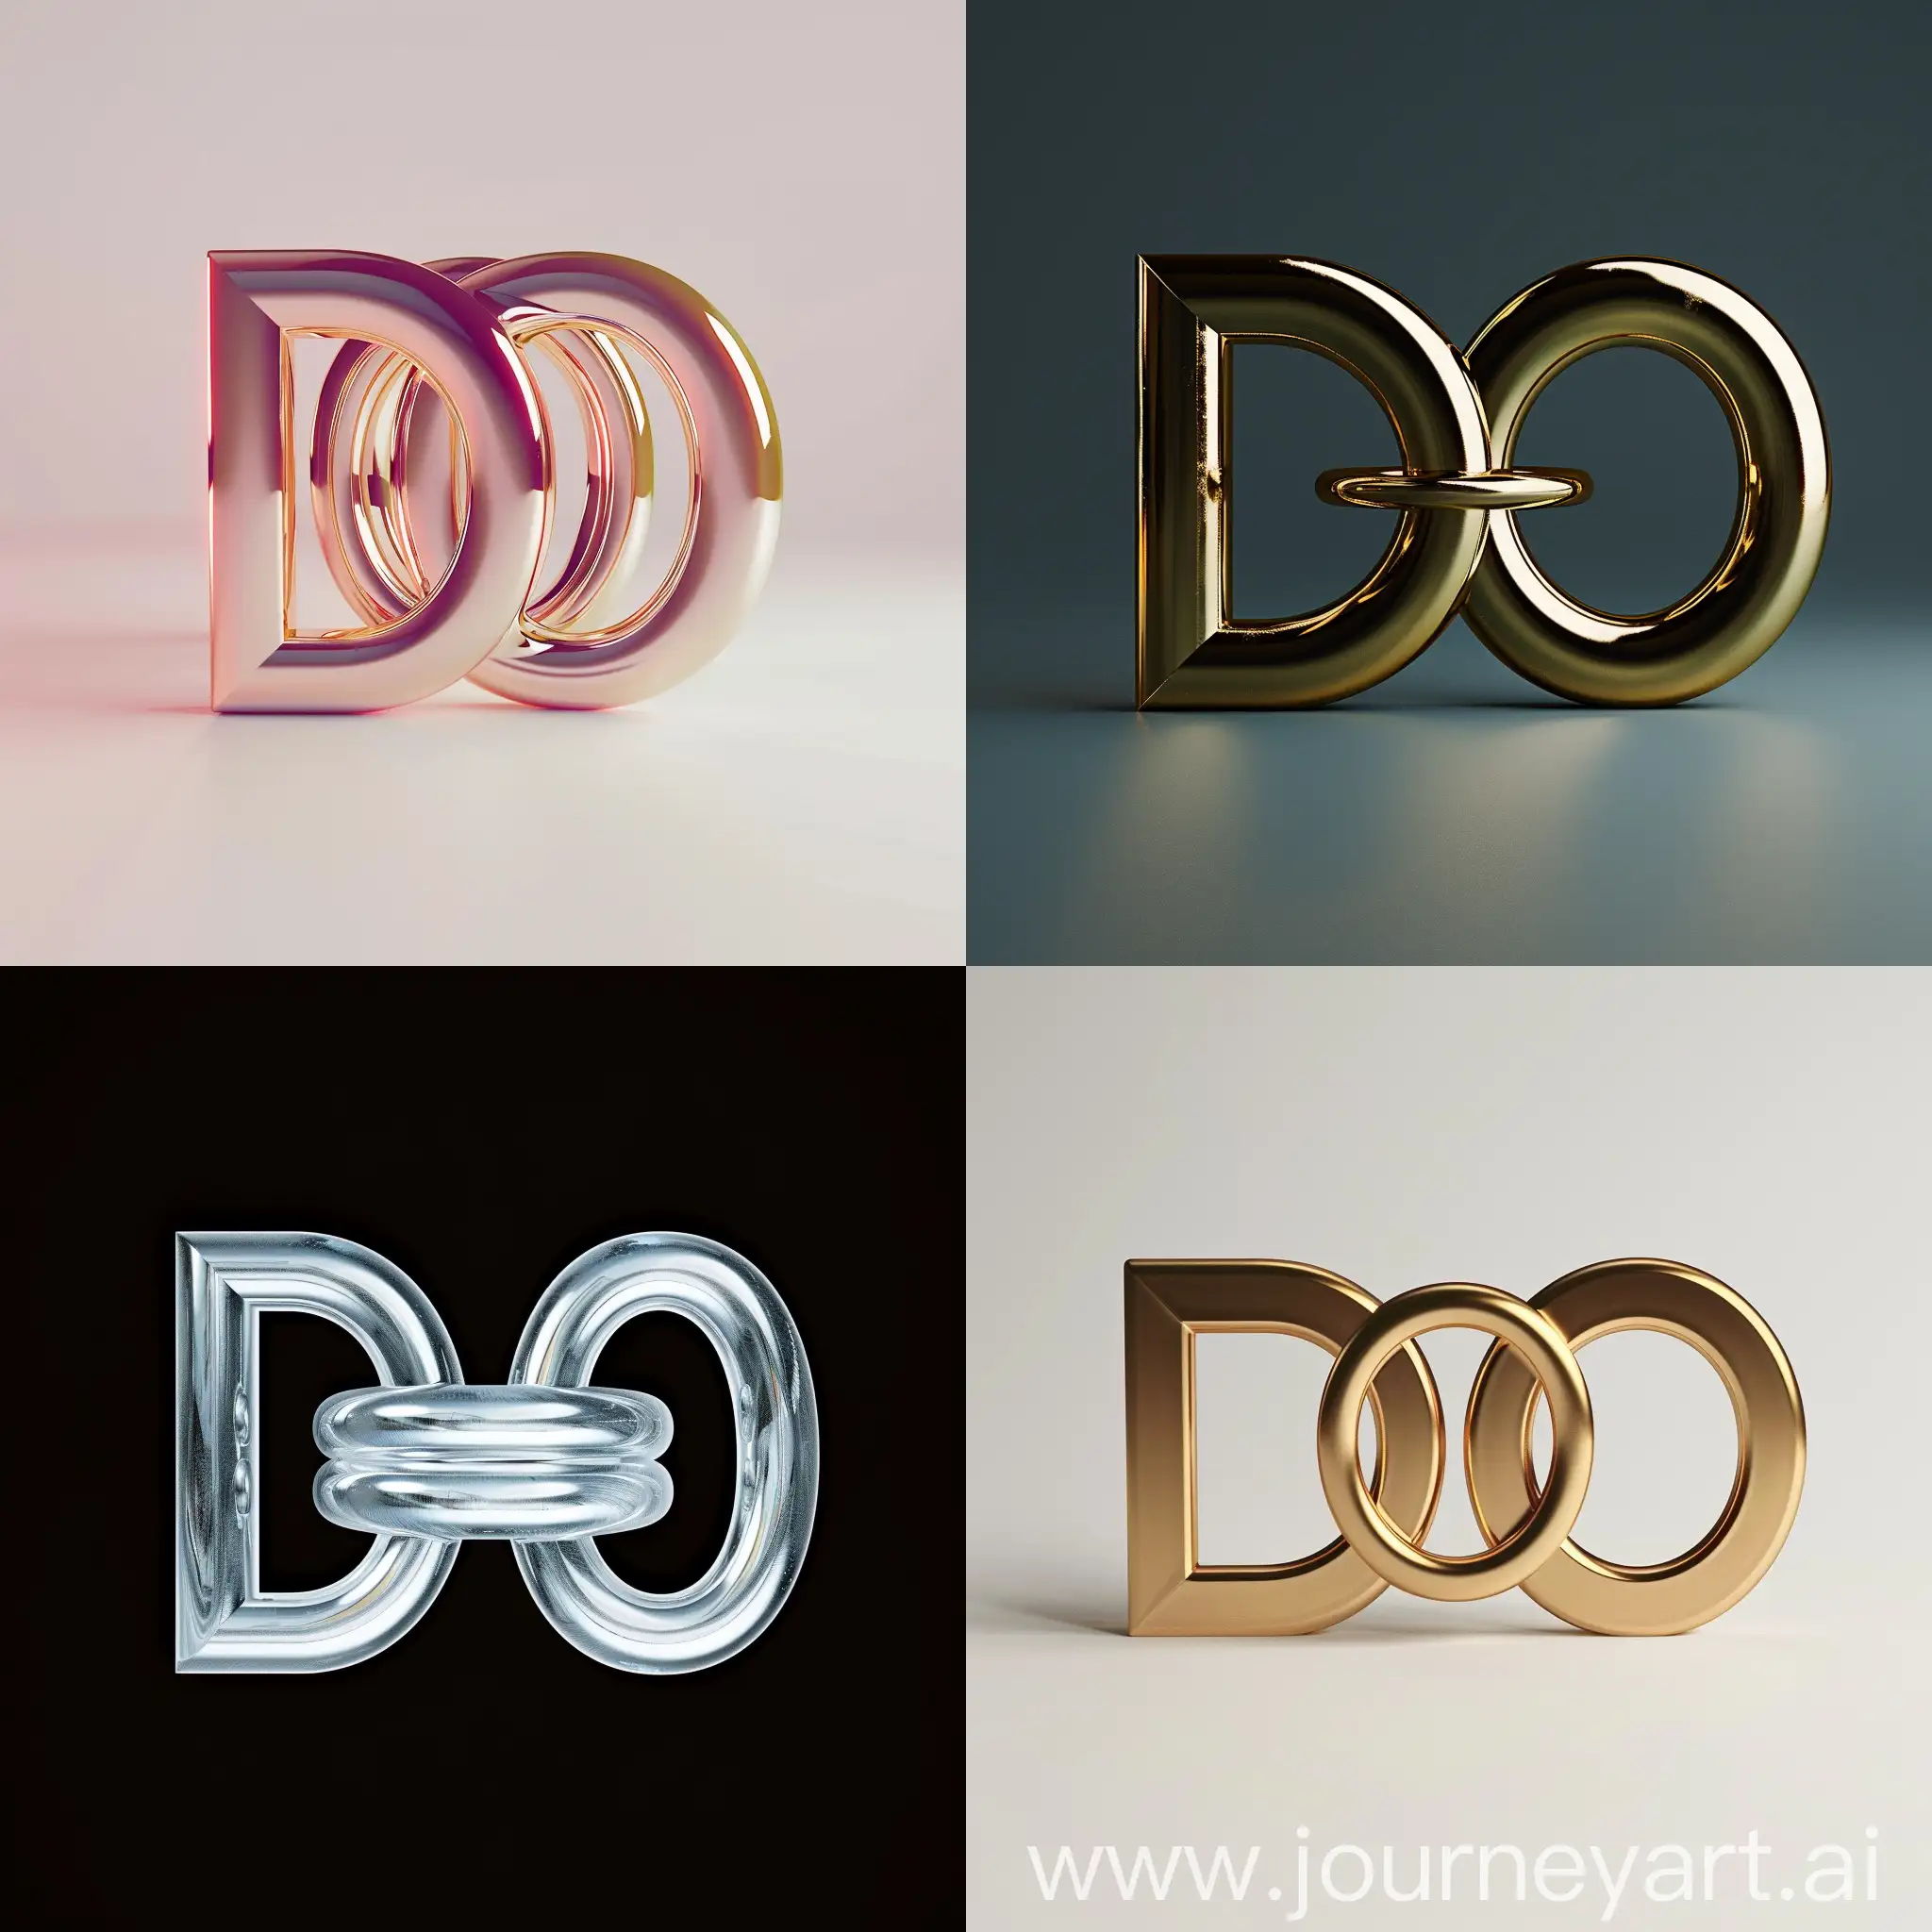 Bold-DO-Typography-Design-with-Interlocking-Rings